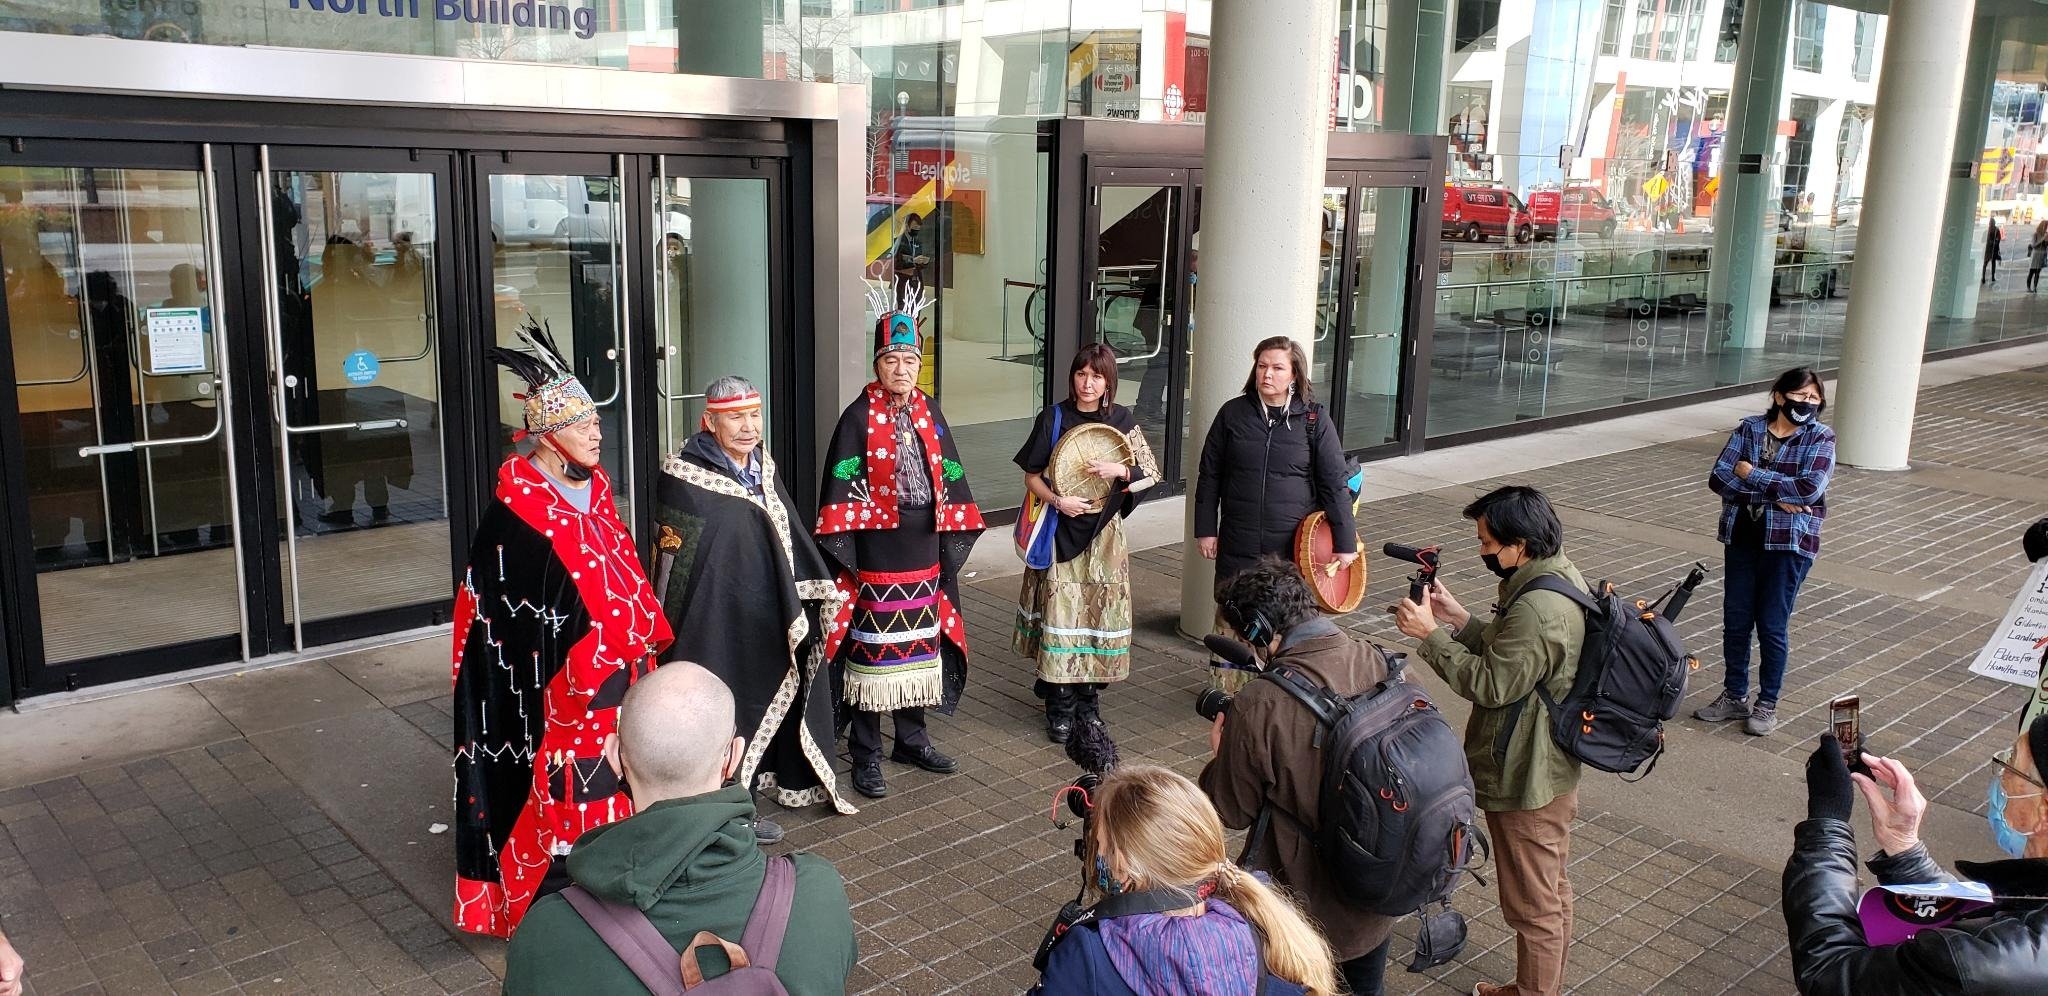 RBC abruptly cancels in-person AGM as Wet’suwet’en Chiefs travel to confront bank